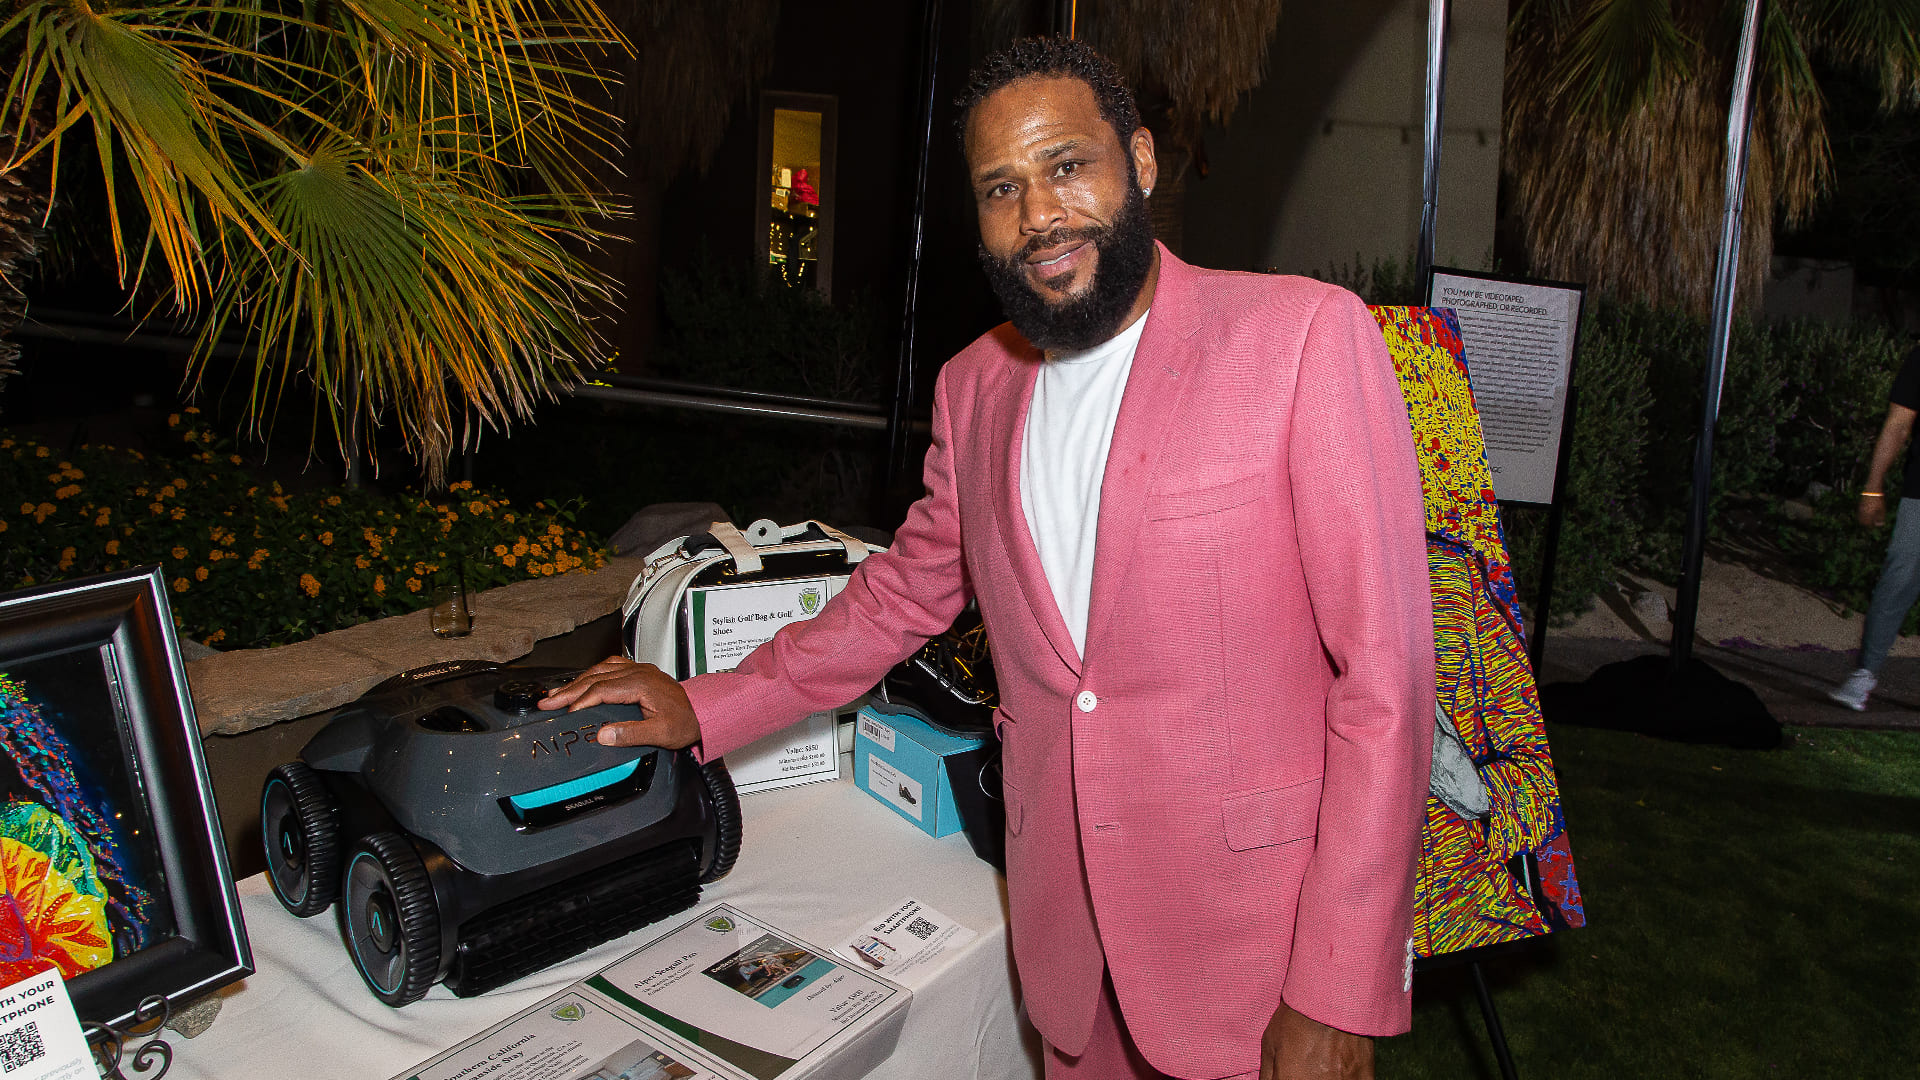 Anthony-Anderson-Golf-Tournament-Teal-Mosss-Photo-1215-Teal-Moss.jpg